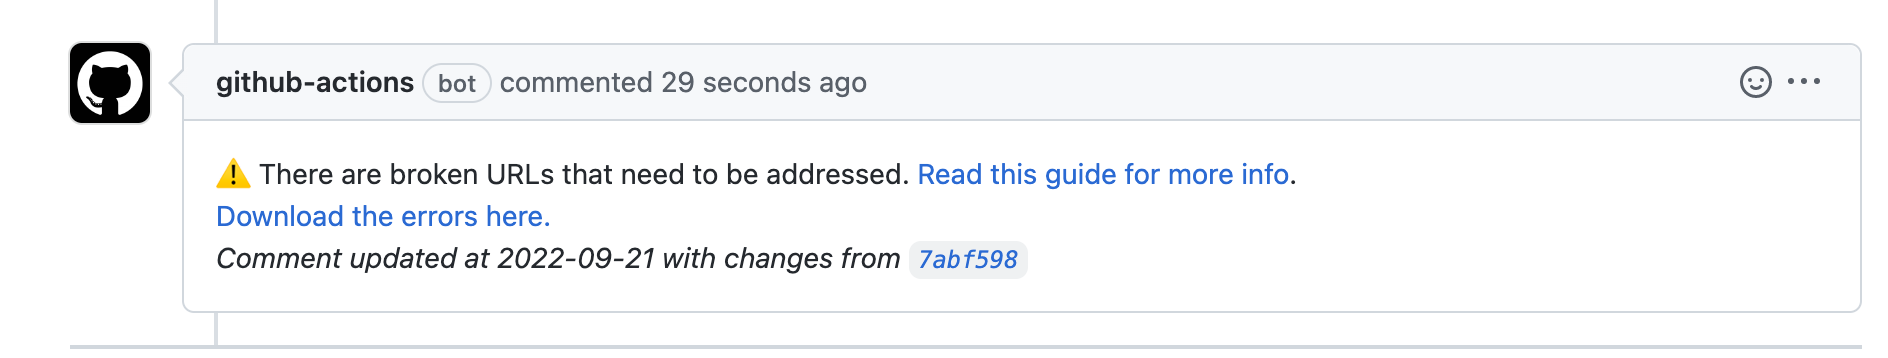 URL issue pull request image